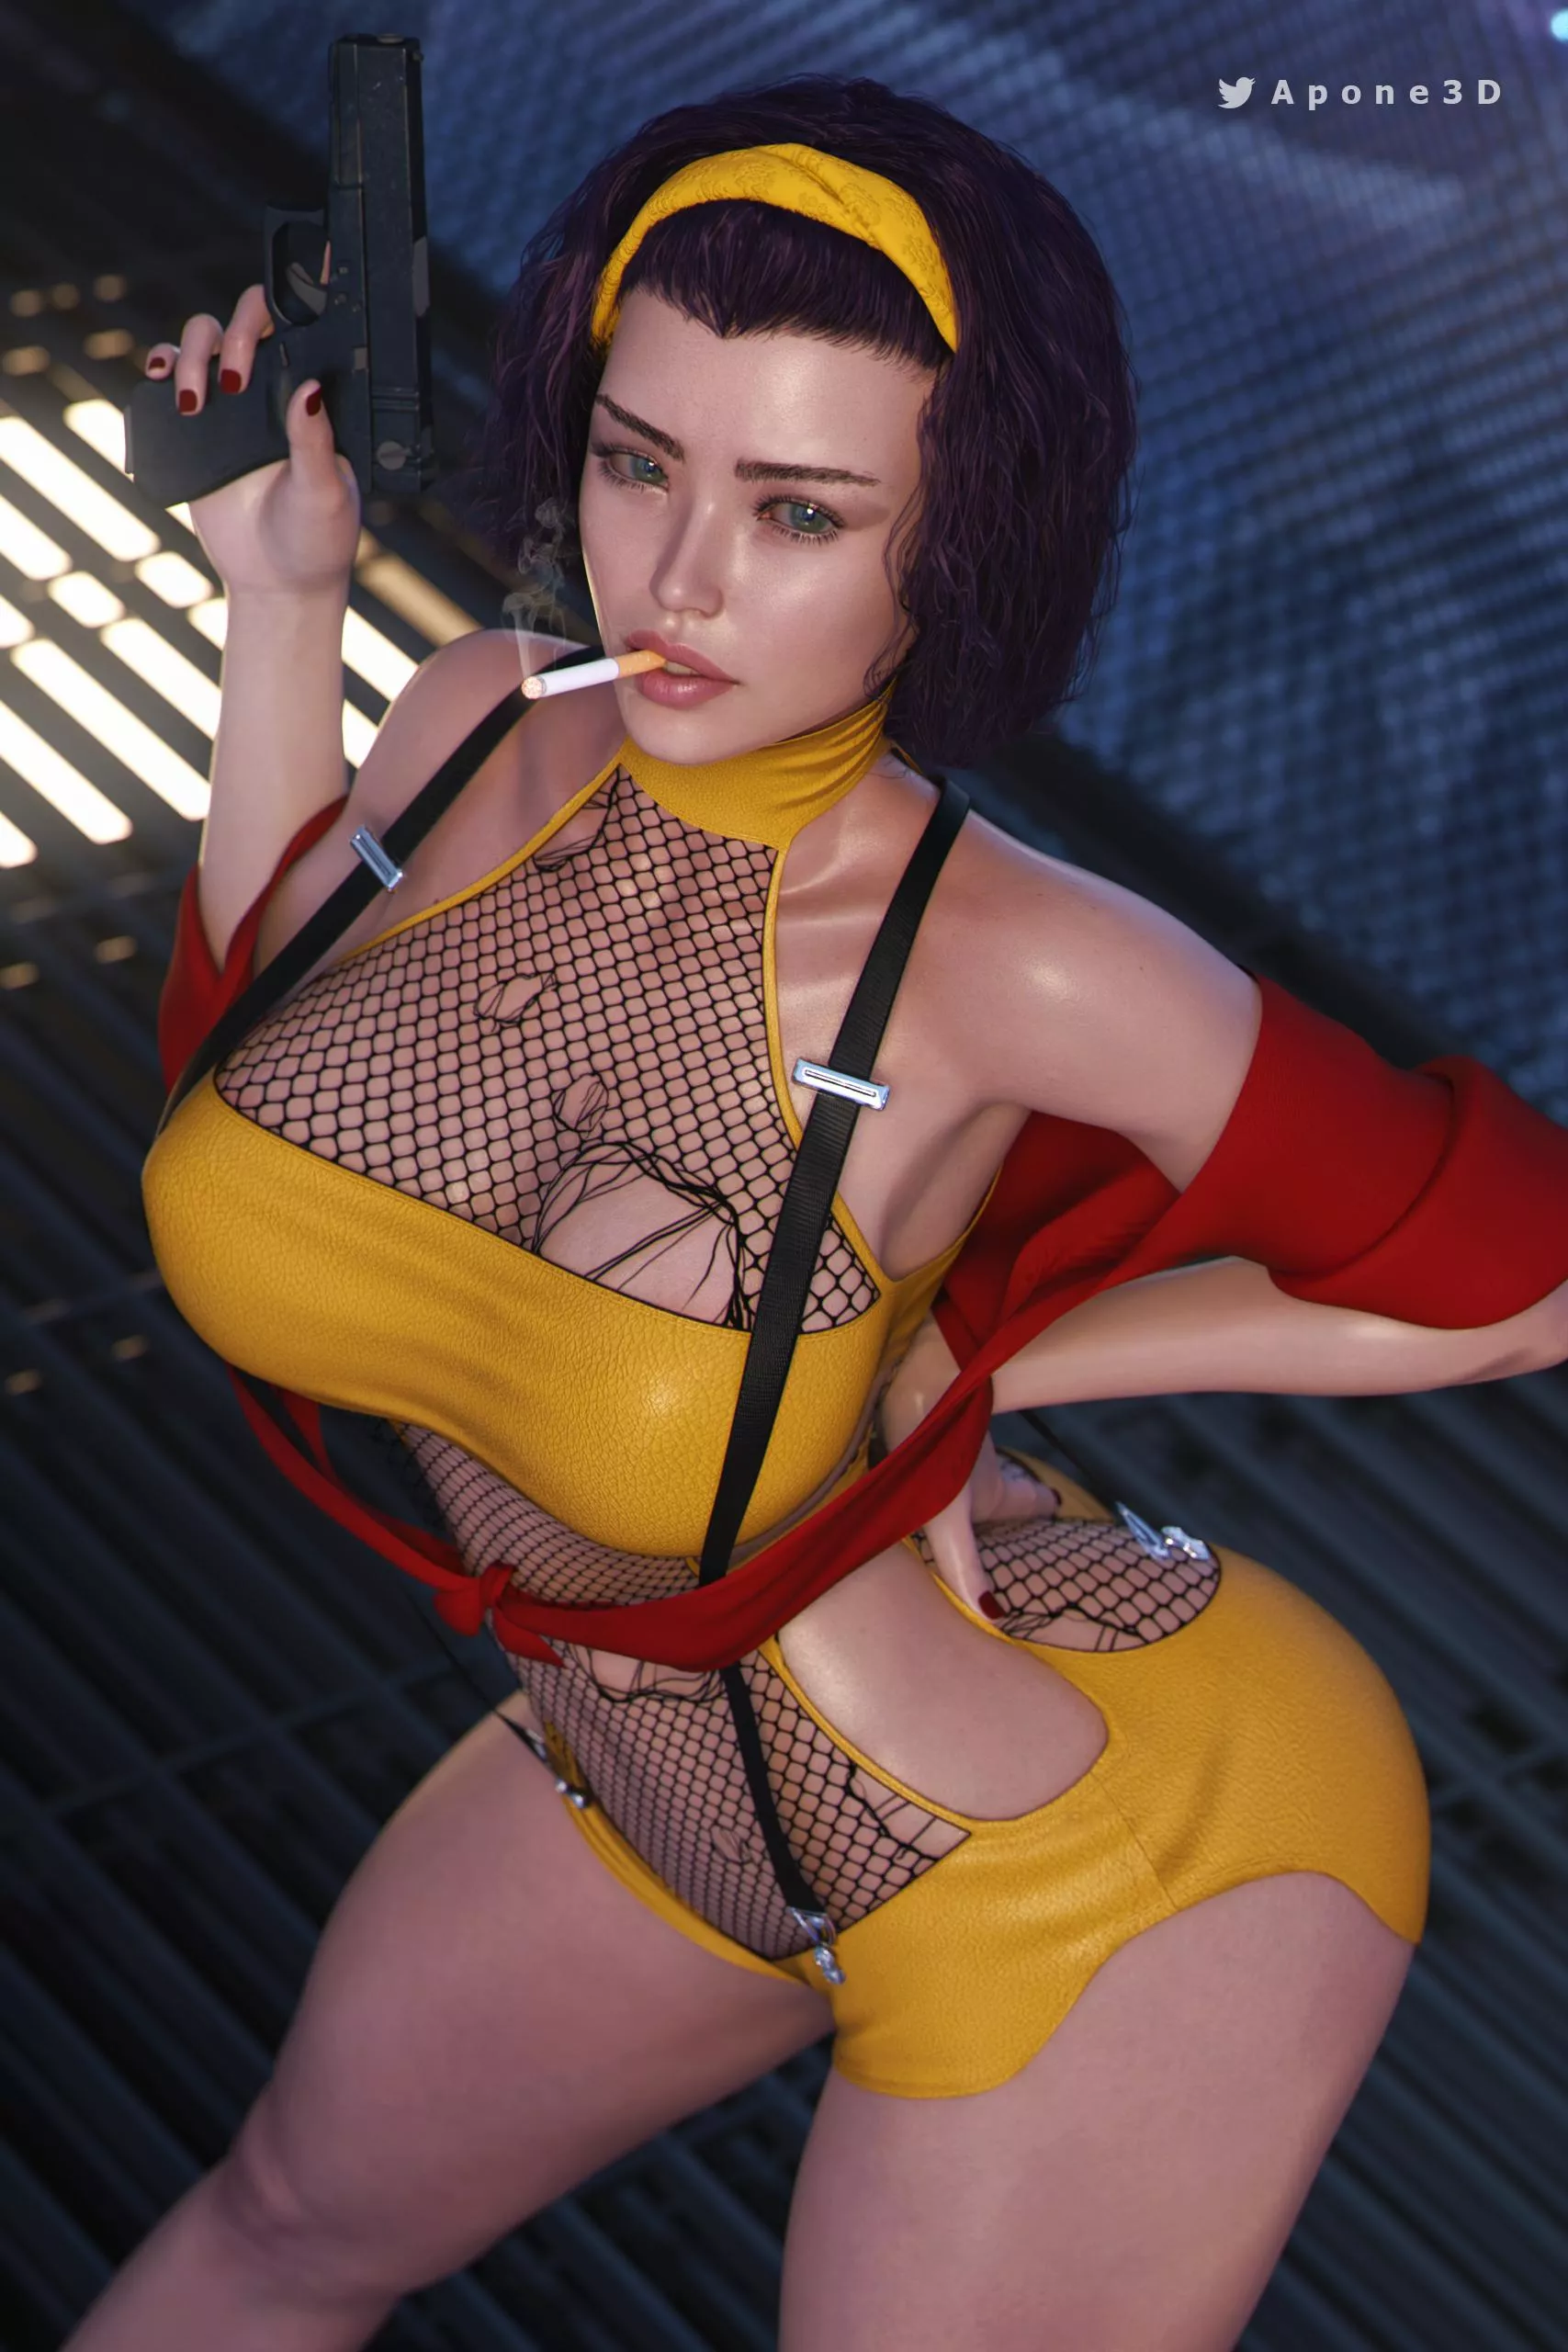 Faye valentine apone3d cowboy bebop nudes in thick_hentai Onlynudes image picture